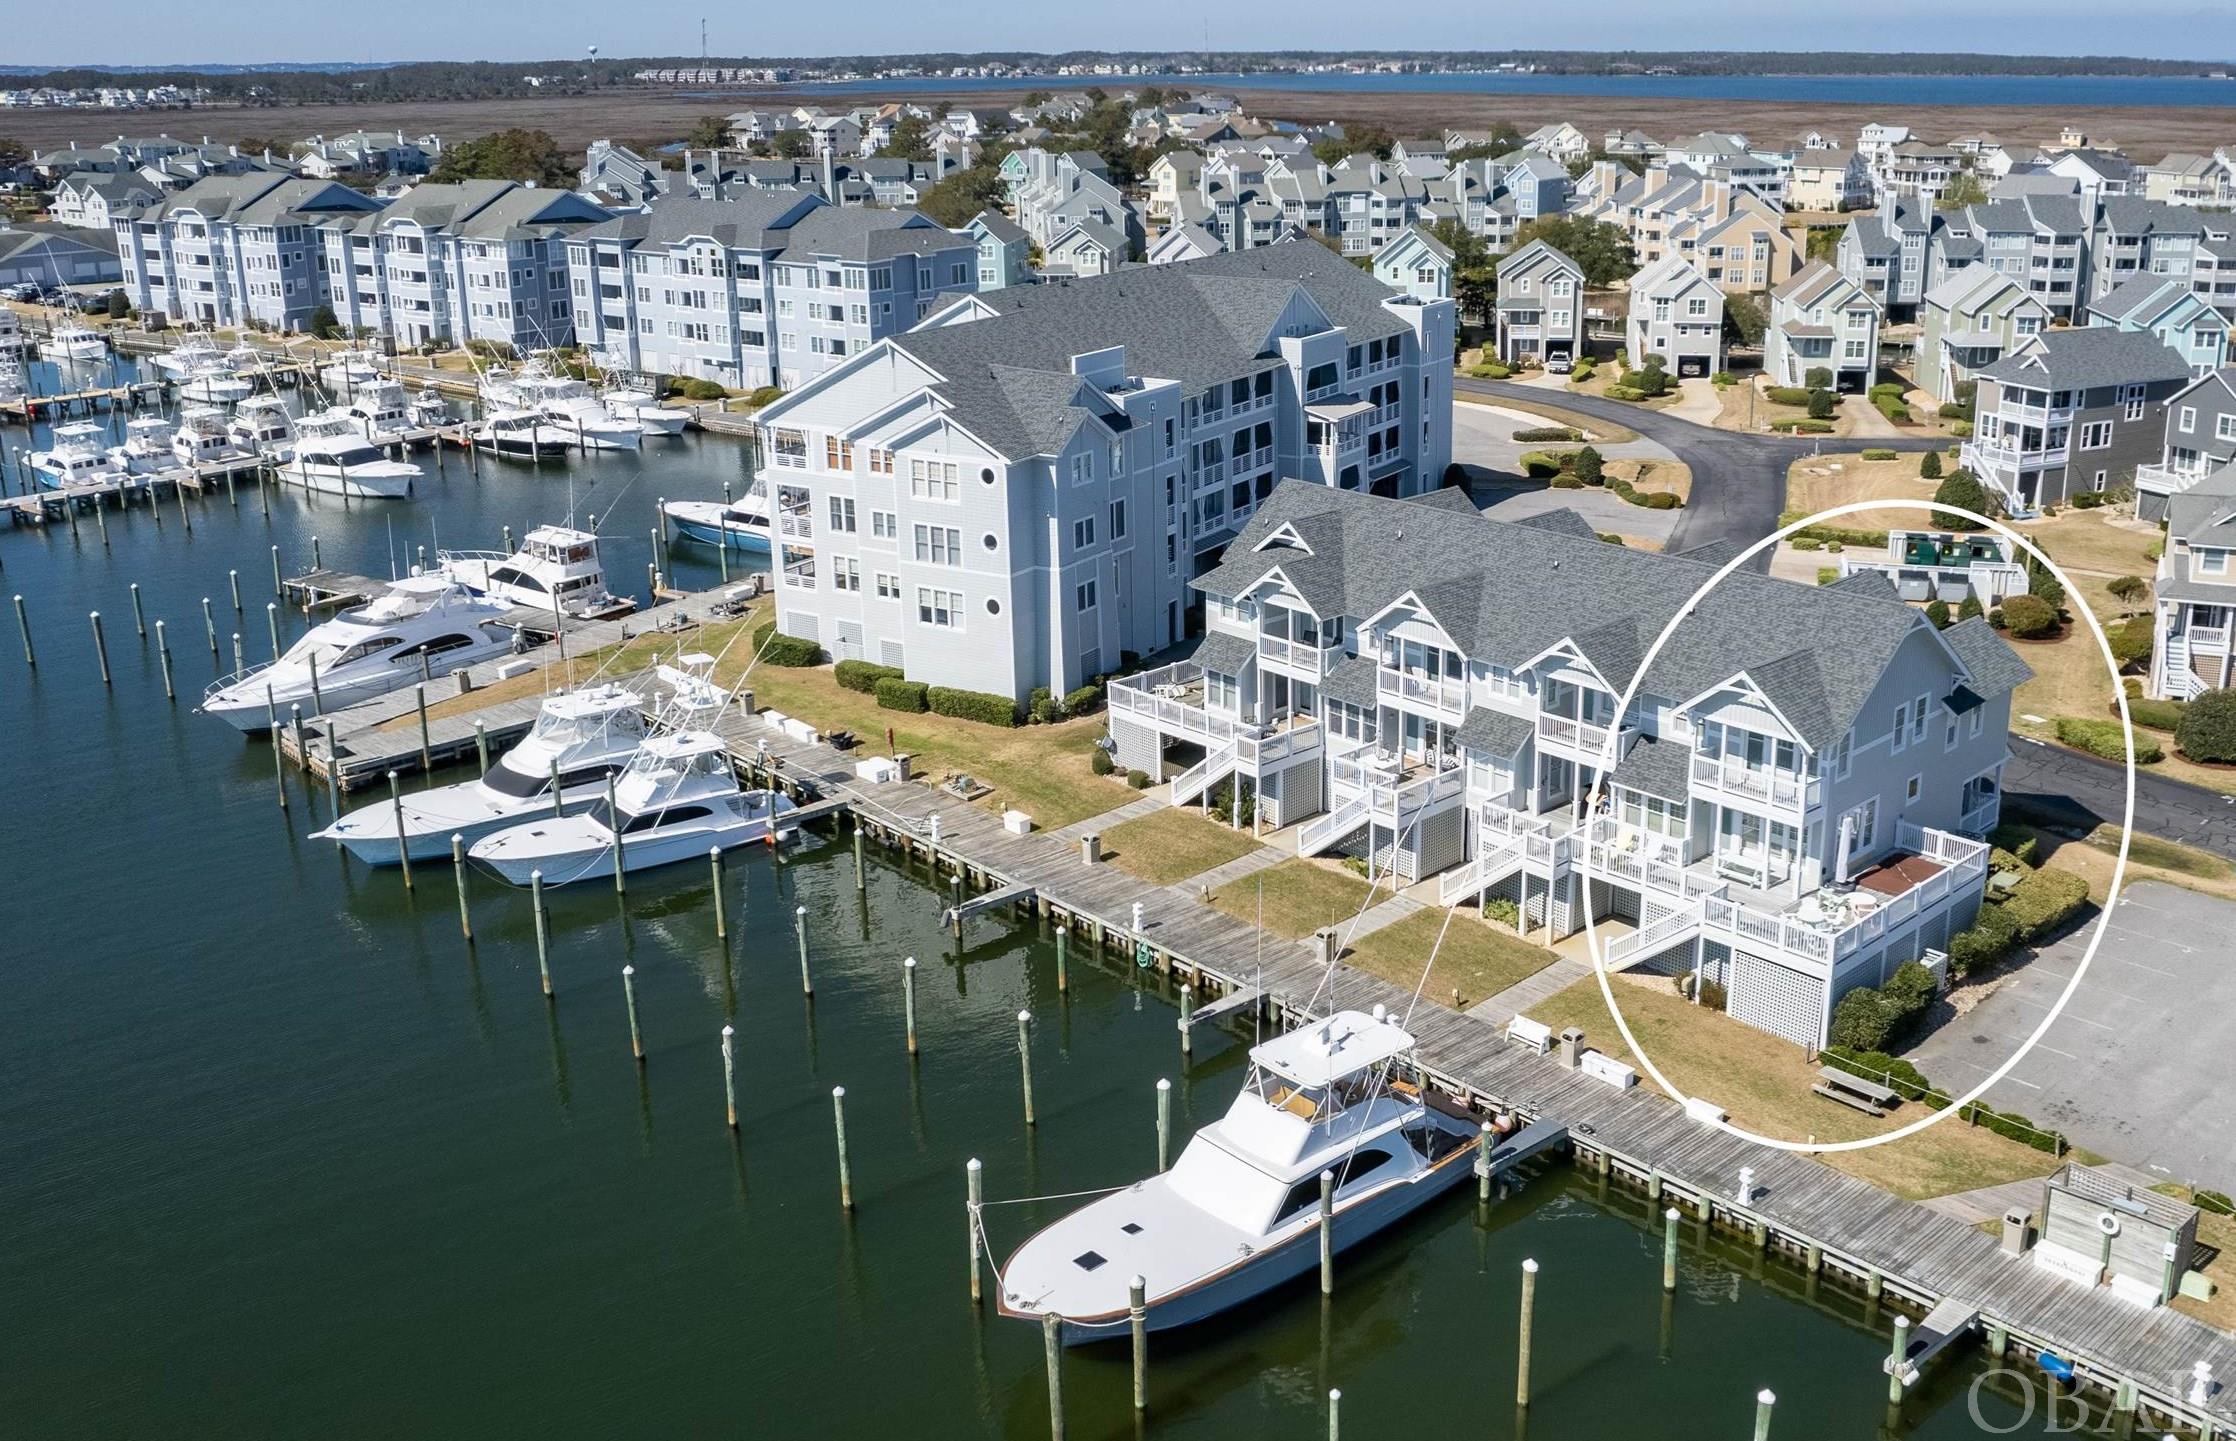 Stunning waterfront TOWNHOME with views of the Roanoke Sound and Pirate's Cove Marina. This end unit townhome is one of the most sought-after locations in Pirate's Cove with steps off the deck down to the dock.   Designed with an open floorplan, this 4BR, 3BA unit offers floor-to-ceiling windows, a spacious living/dining room and a kitchen perfect for entertaining or just relaxing while watching the boats return from their day of Off-Shore Fishing. The roomy kitchen features STAINLESS appliances, an eat on bar,  granite countertops and under-counter lighting. Sold FURNISHED, additional interior features include cathedral ceilings, master bedroom with ensuite bath and private balcony, three guest rooms, laundry room, gas fireplace, and a huge deck with HOT TUB.  Exterior features include multiple storage closets with additional enclosed space under the deck, an outdoor shower, dry entry, and a privacy wall.    Located in the Gulfstream subdivision of Pirate's Cove, community amenities  include: outdoor tennis, two pools, clubhouse, fitness center, playground, miles of perimeter docks, and sound access.  Located only steps to BlueWater Raw Bar and Grill, this unit offers location value and close proximity to marina activities. Staging by Site to Sea.